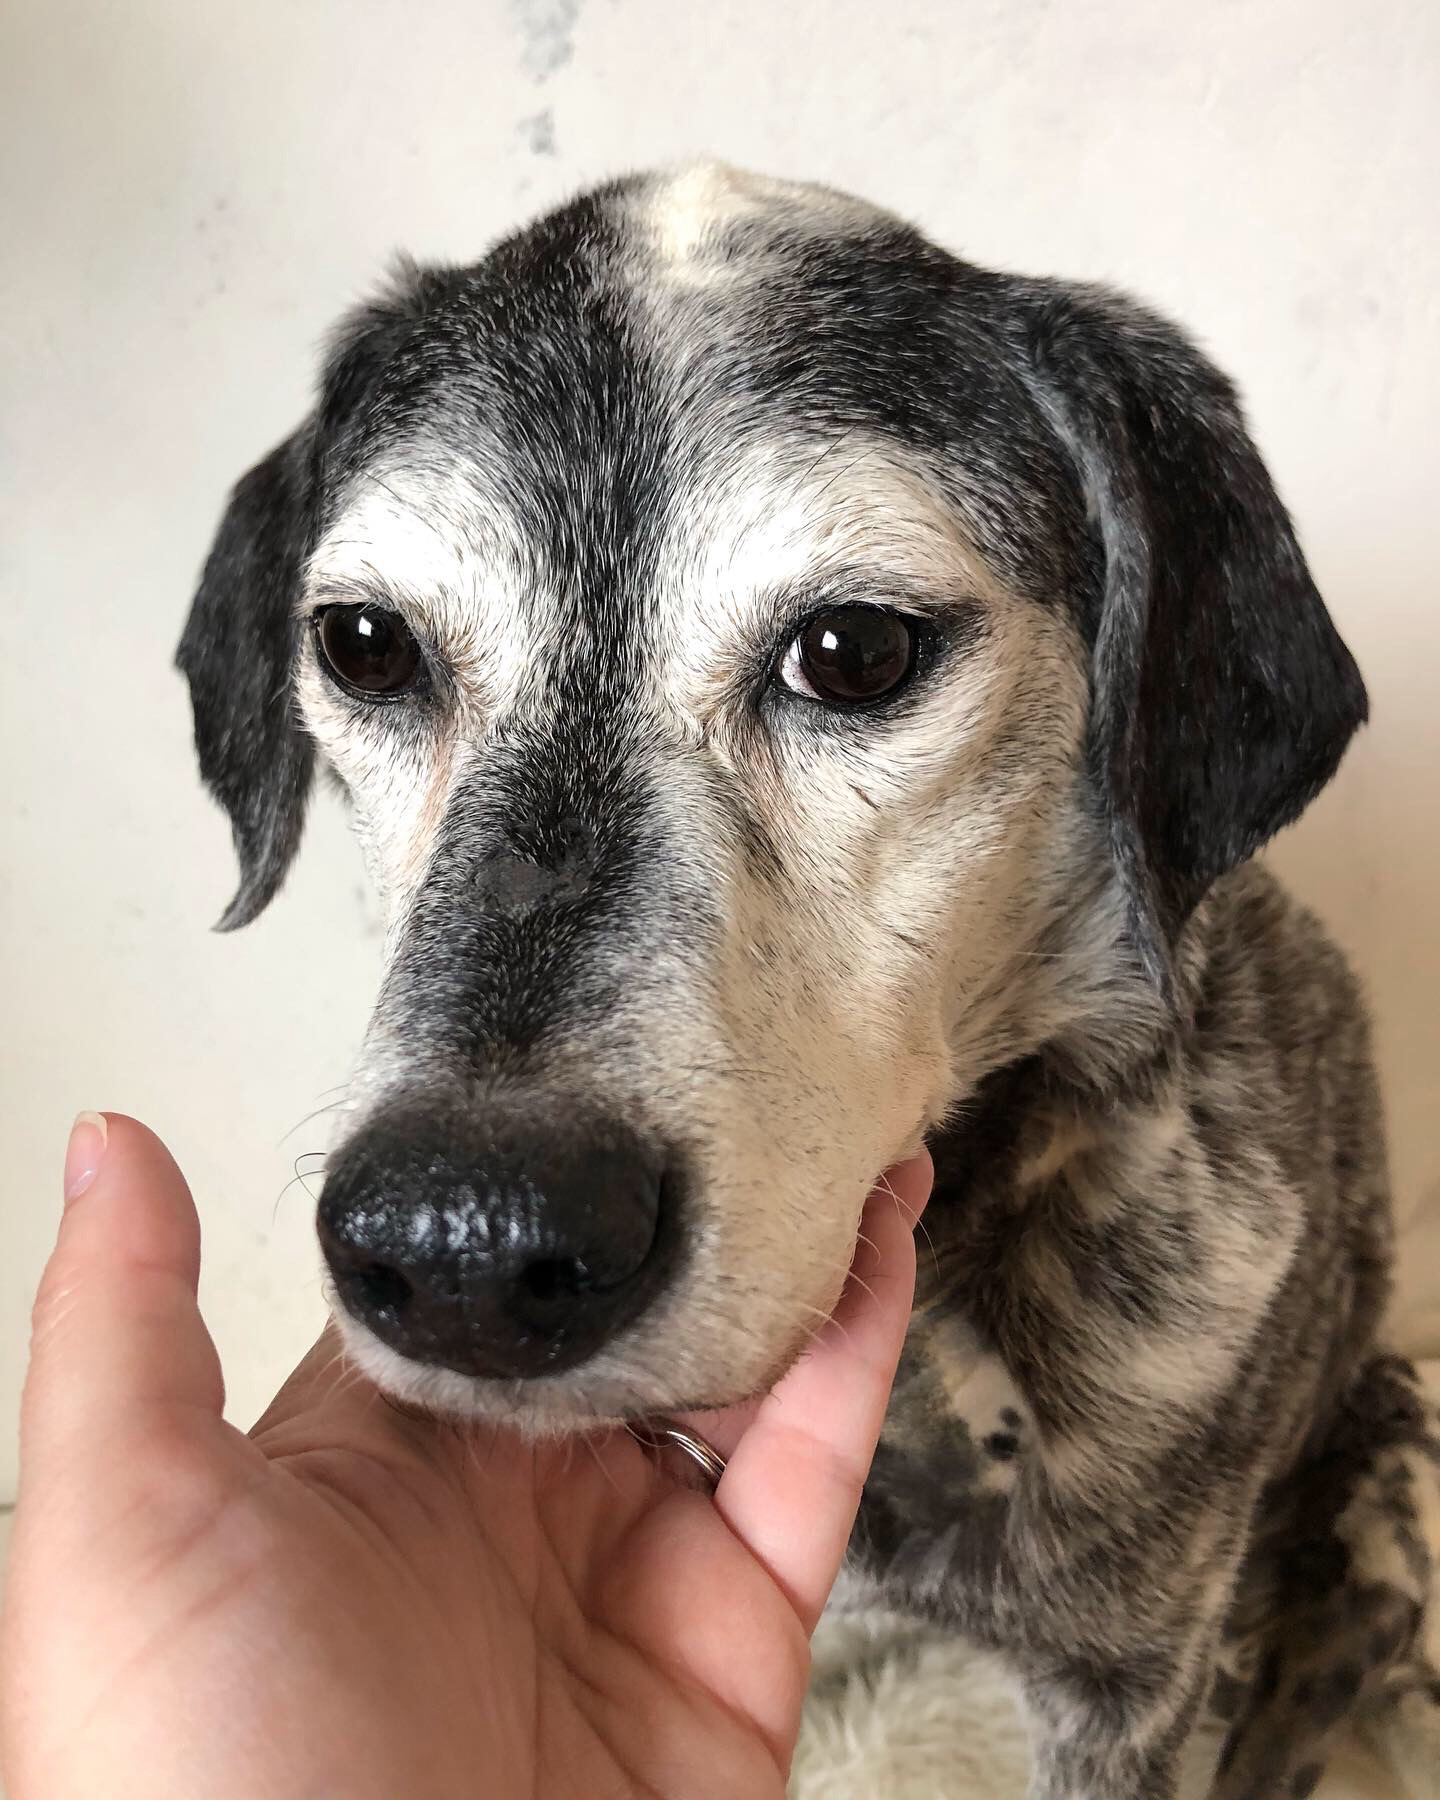 Full taxidermy of a dog, with their face being cupped by a person's hand